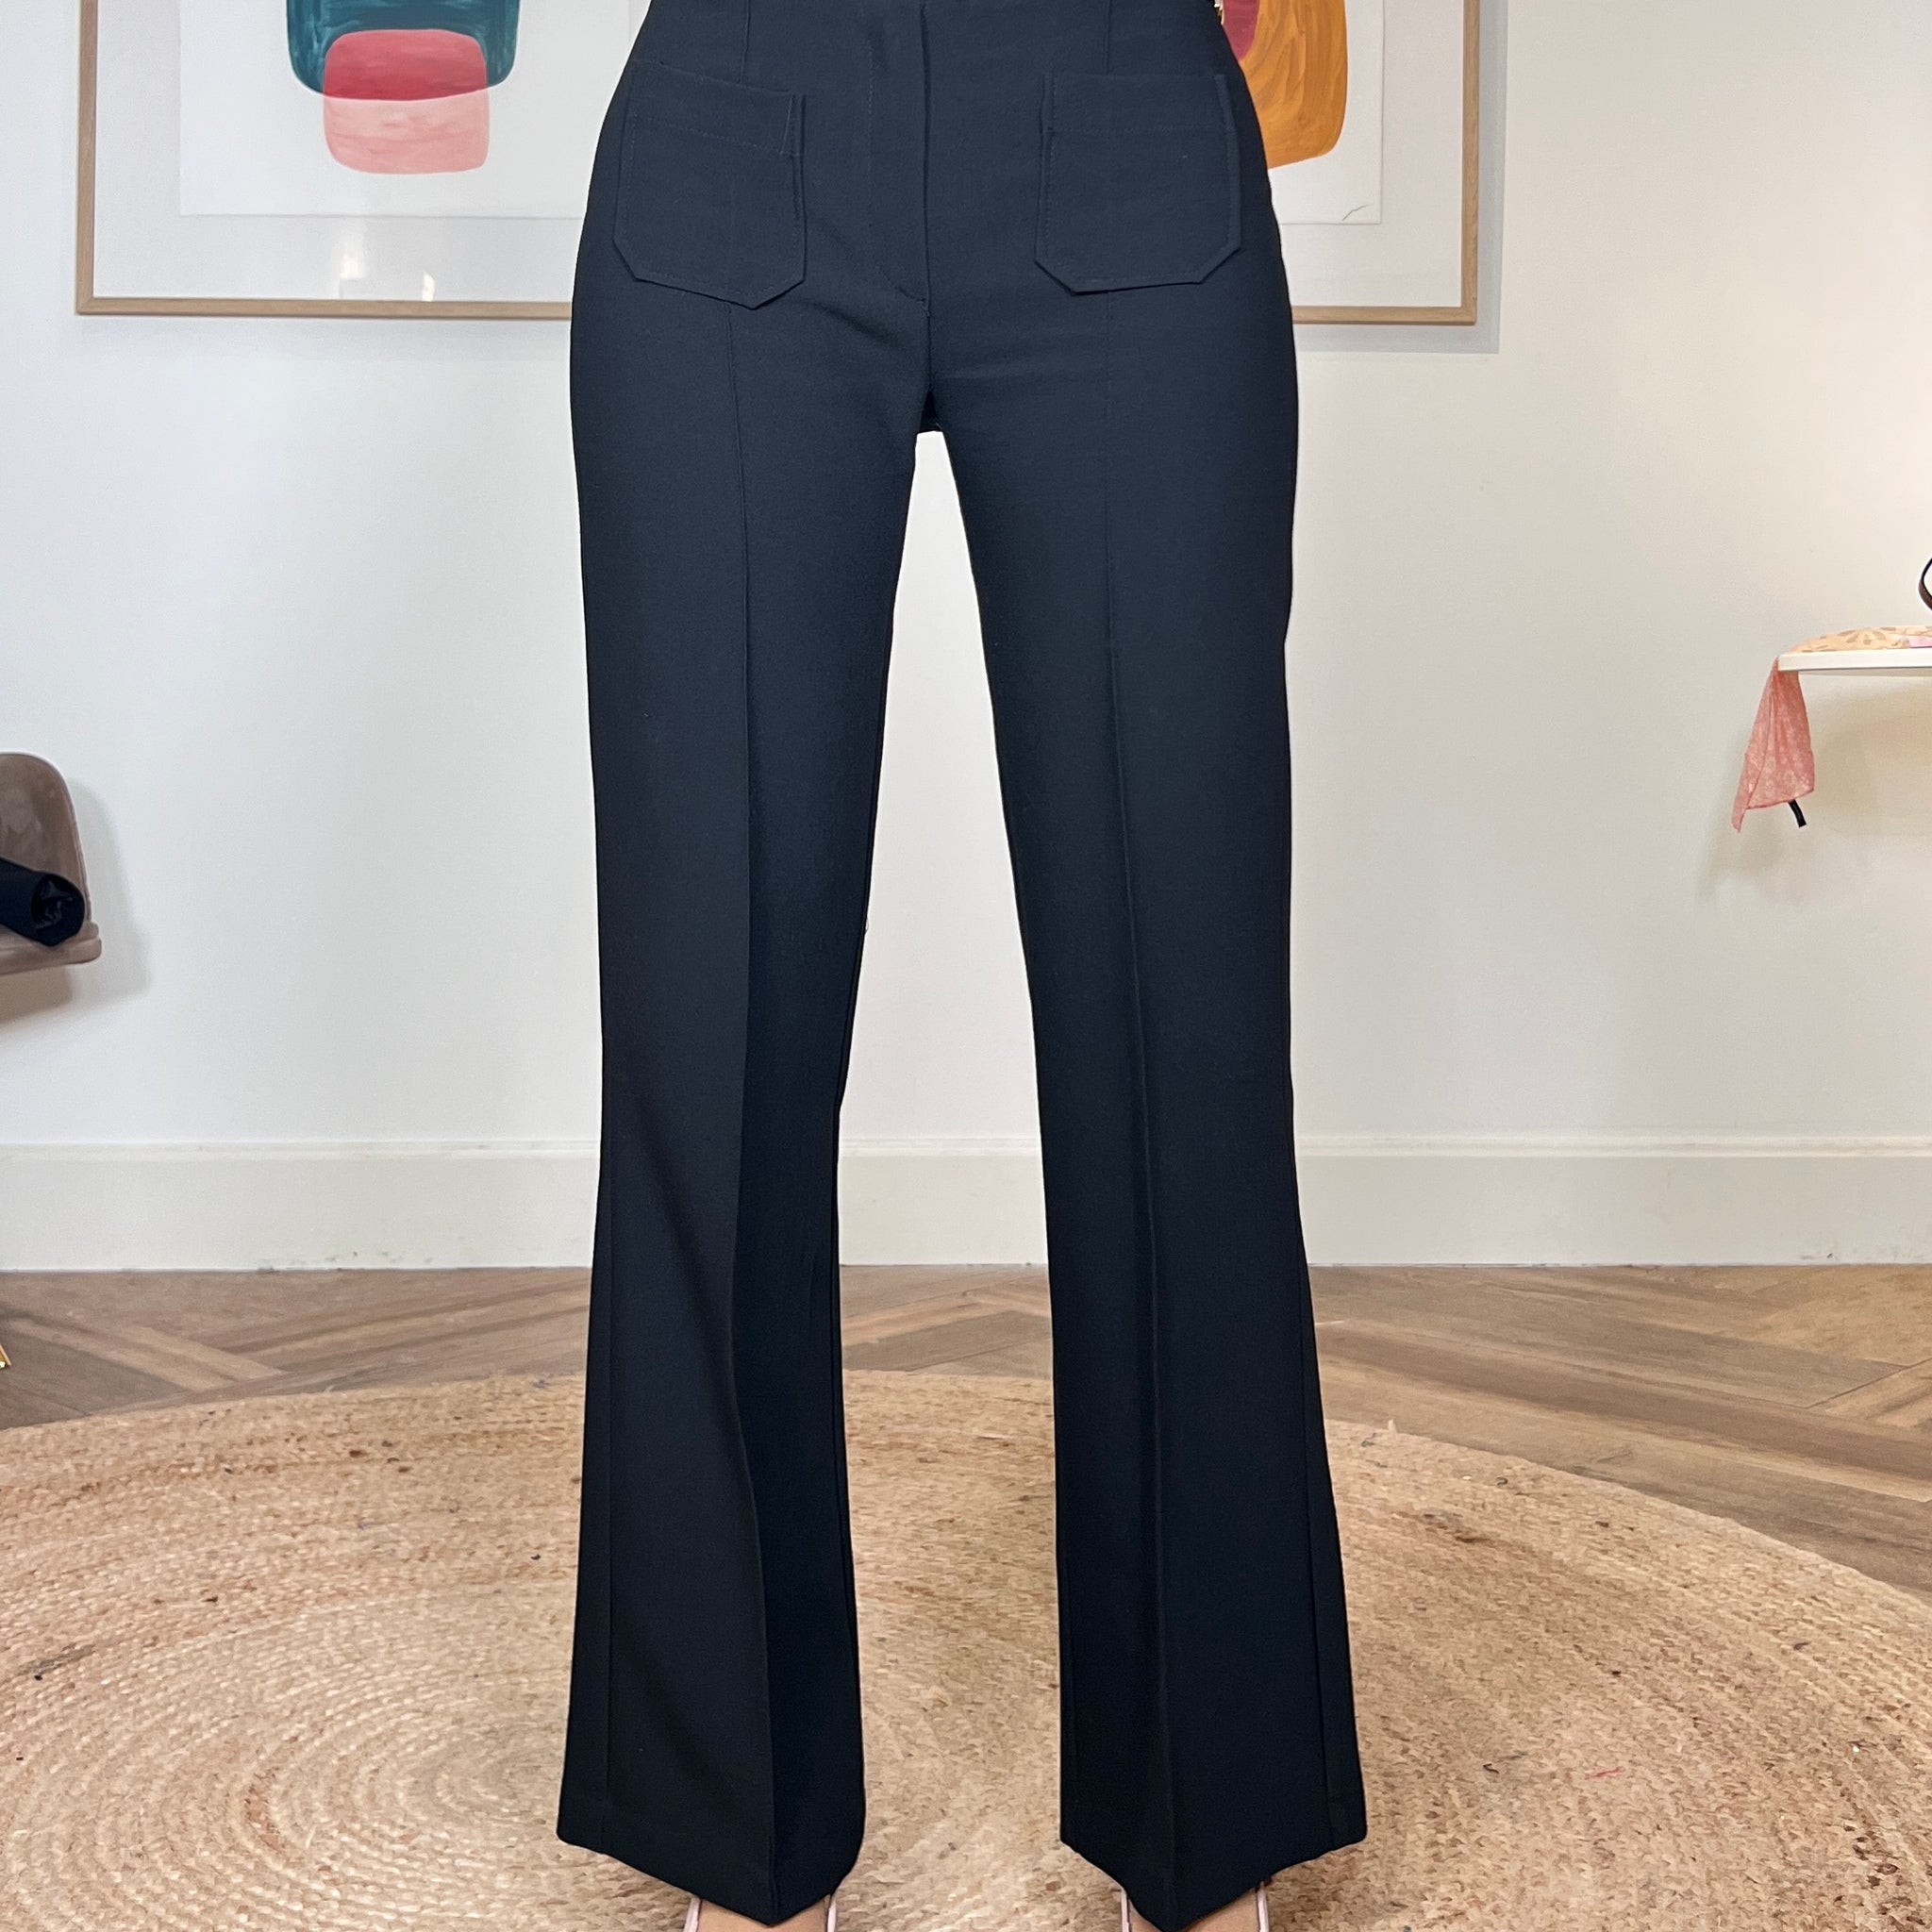 IDEAL PANTS WITH BLACK POCKETS